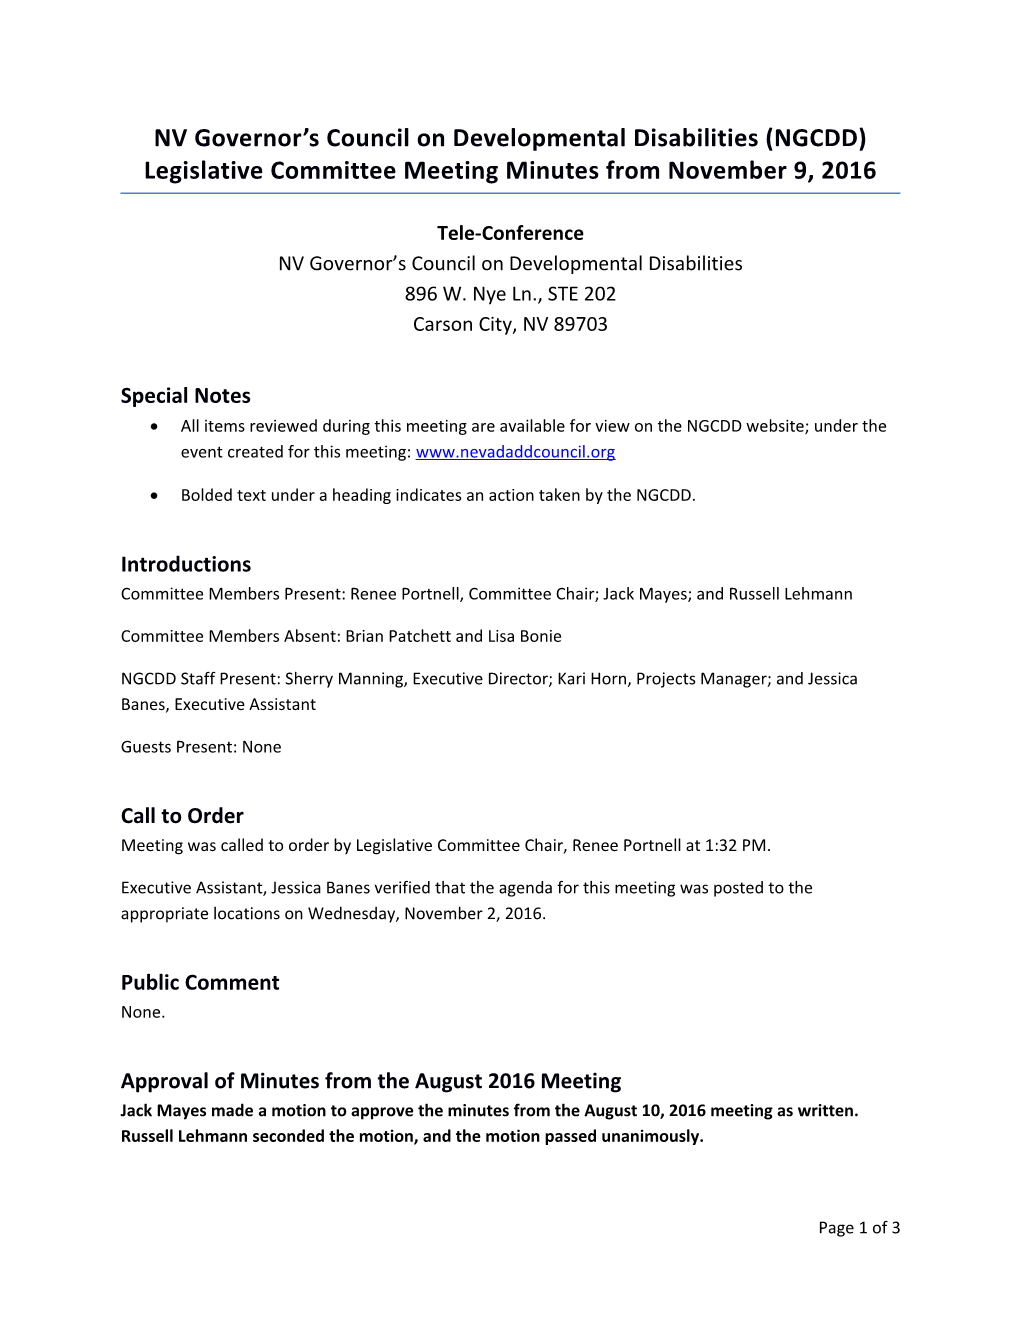 NV Governor S Council on Developmental Disabilities (NGCDD) Legislative Committee Meeting